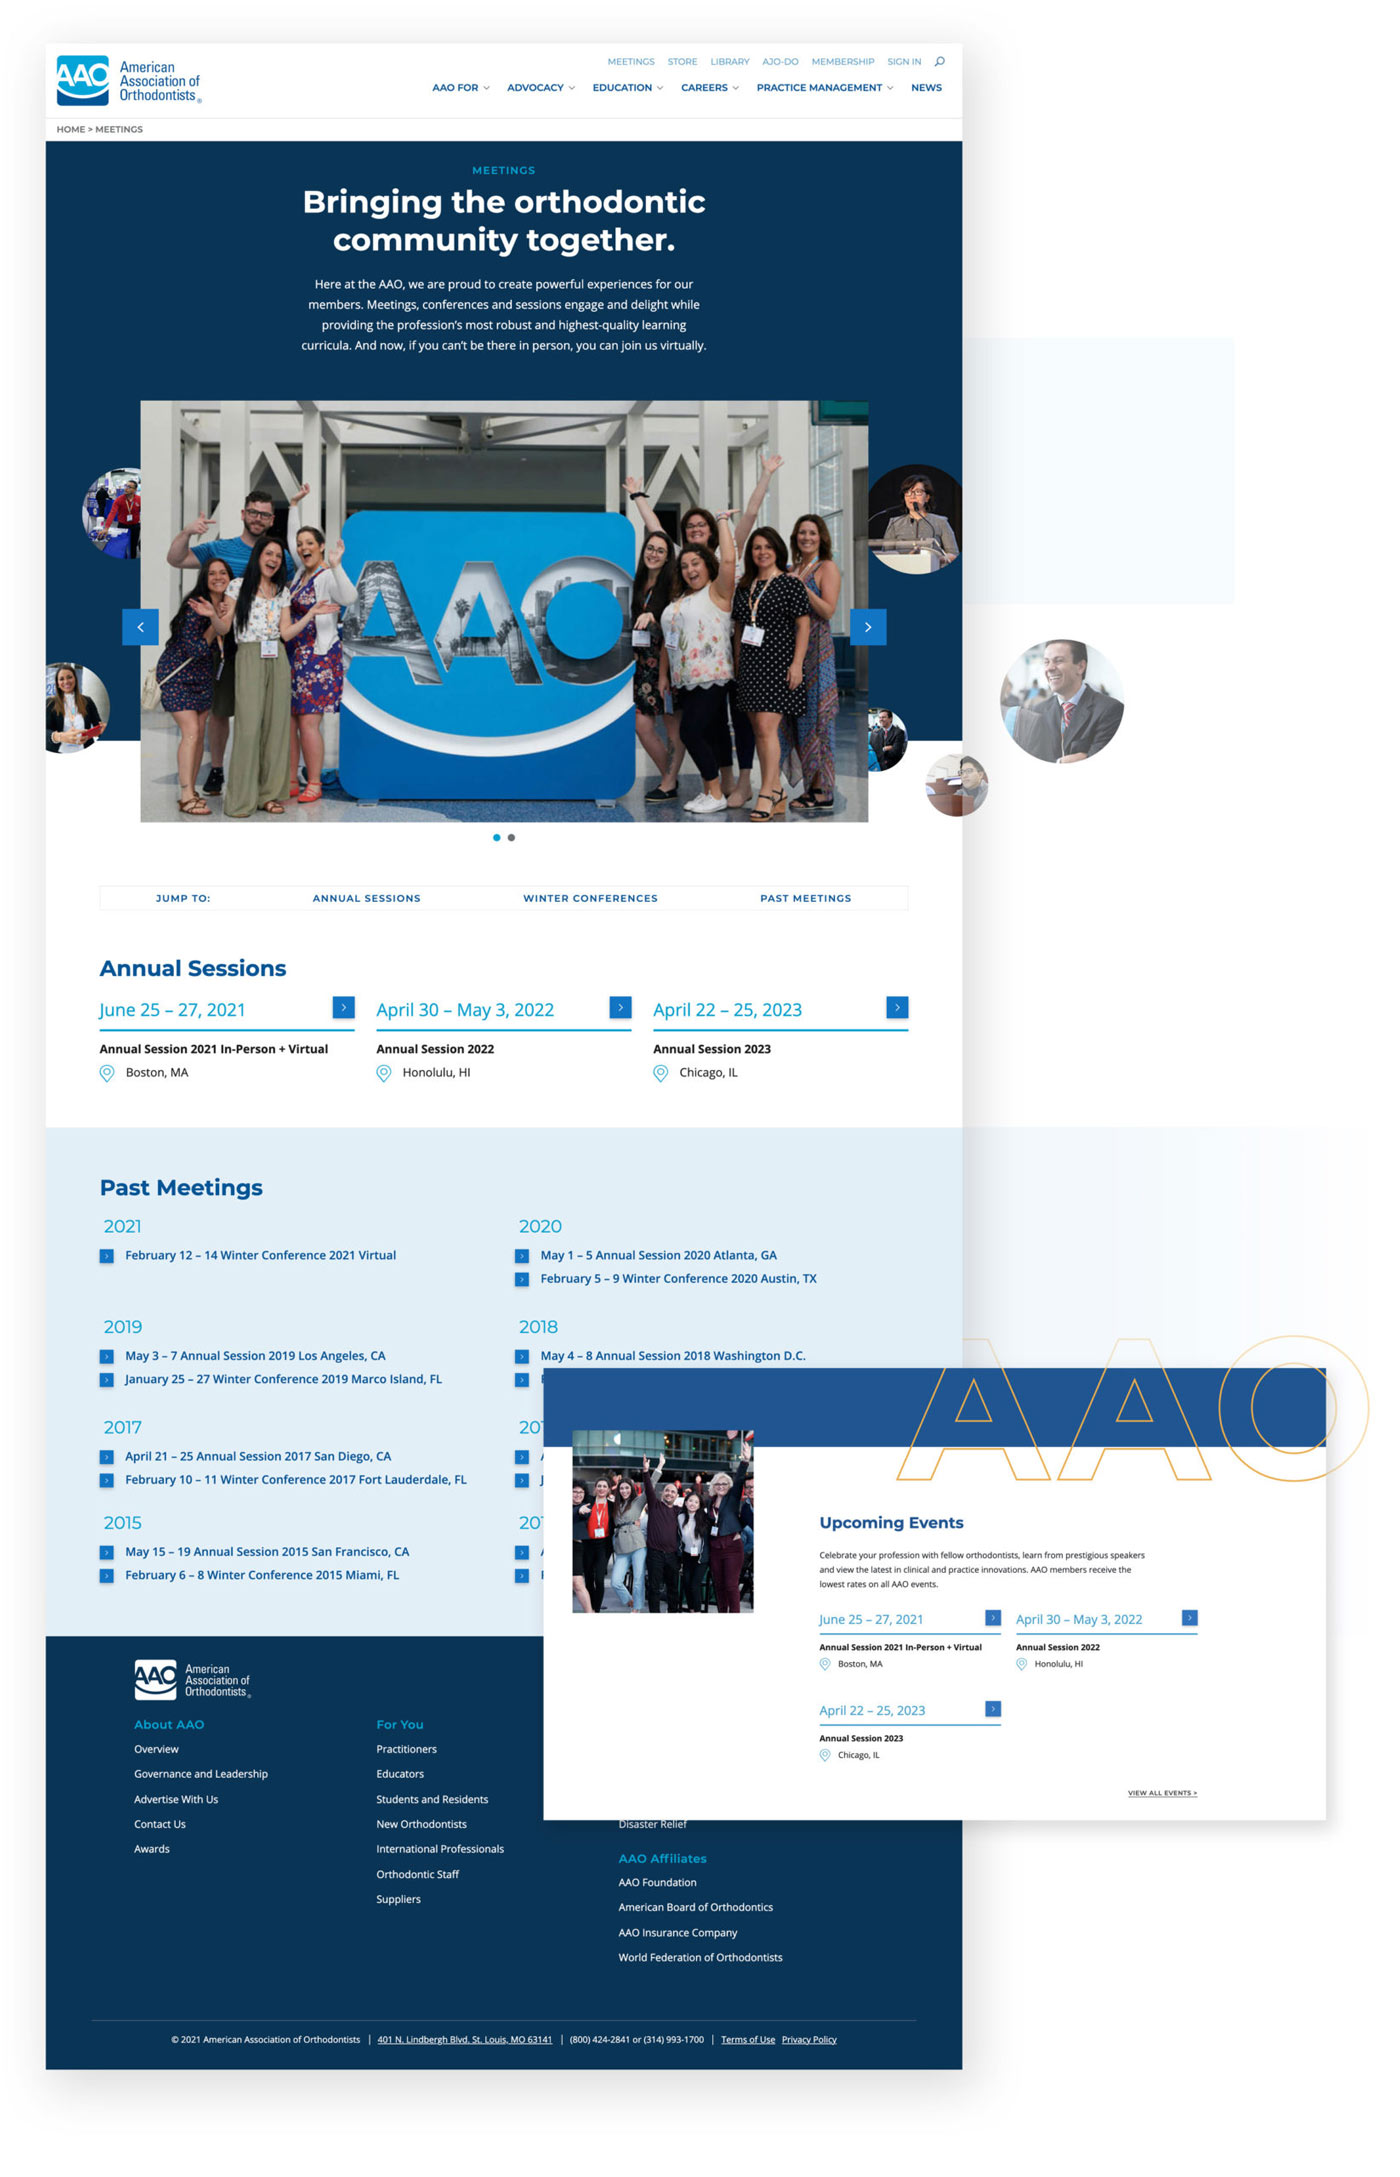 The events page from the AAO website redesign